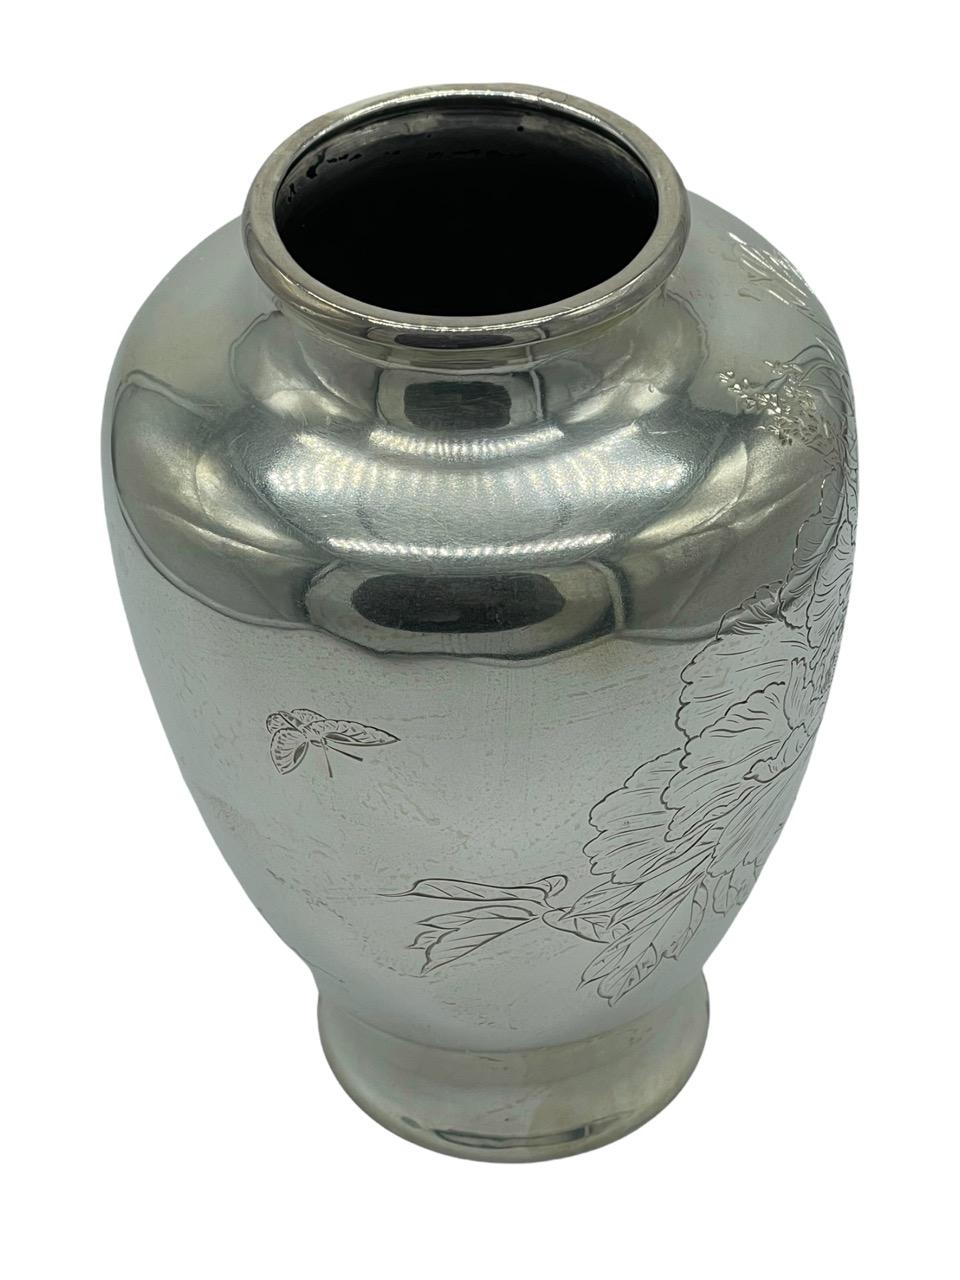 19th Century Japanese sterling silver vase with finely carved and embossed chrysanthemum flowers and butterfly. It has its maker’s mark on the bottom.

